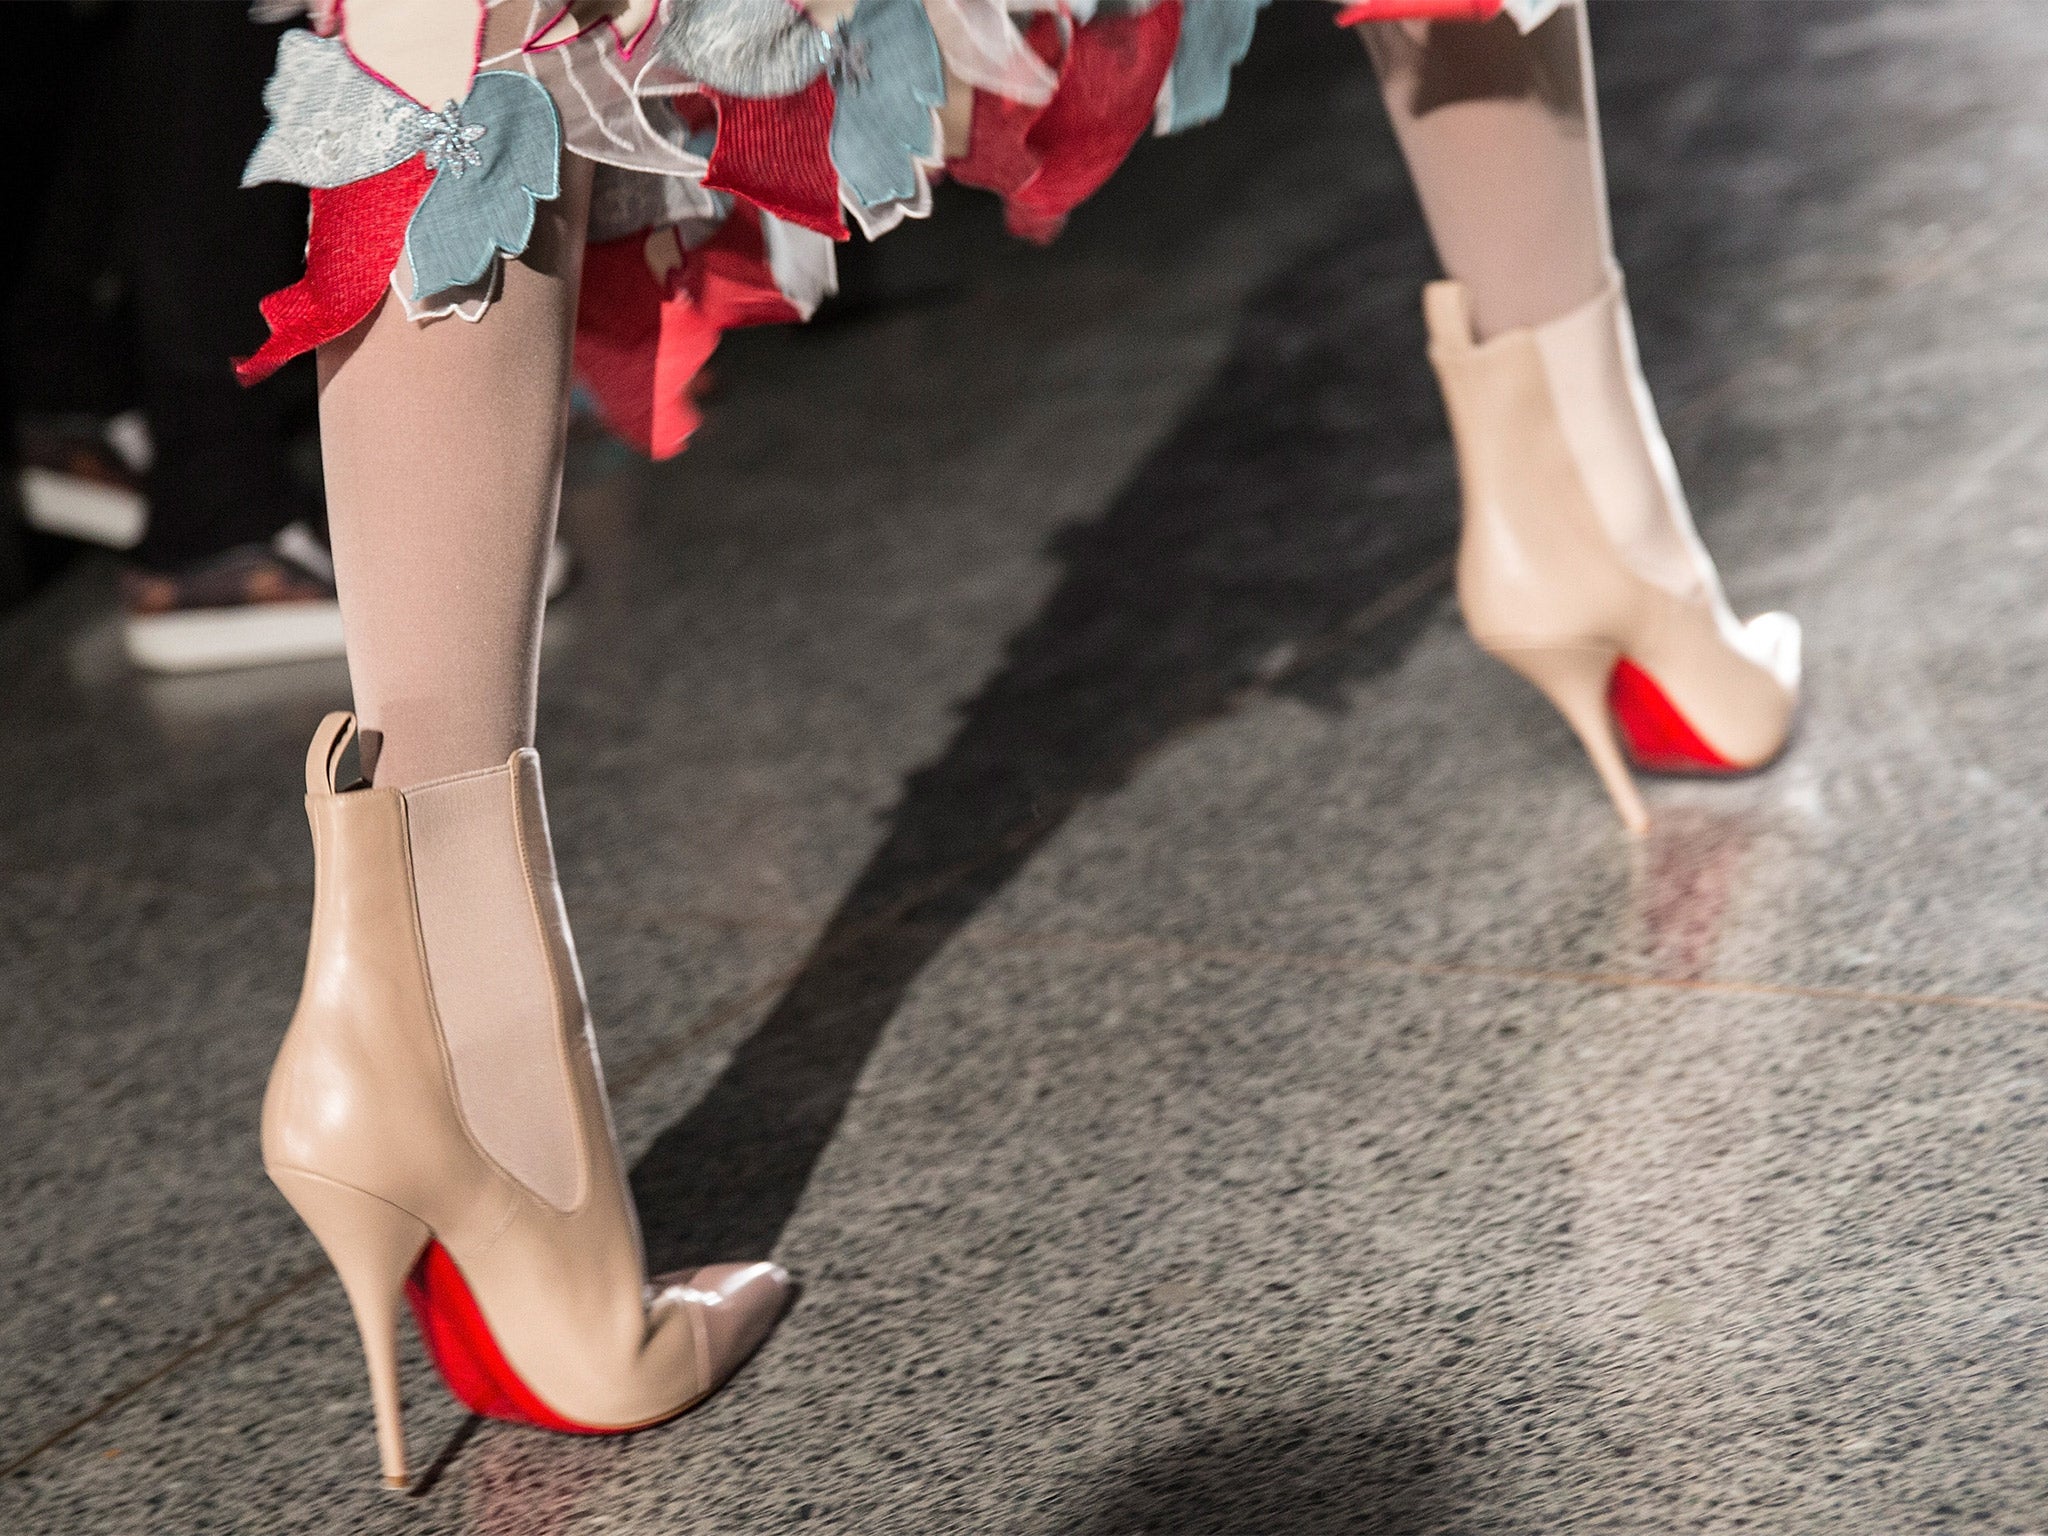 More Men Are Wearing Stilettos—if They Can Find Their Size